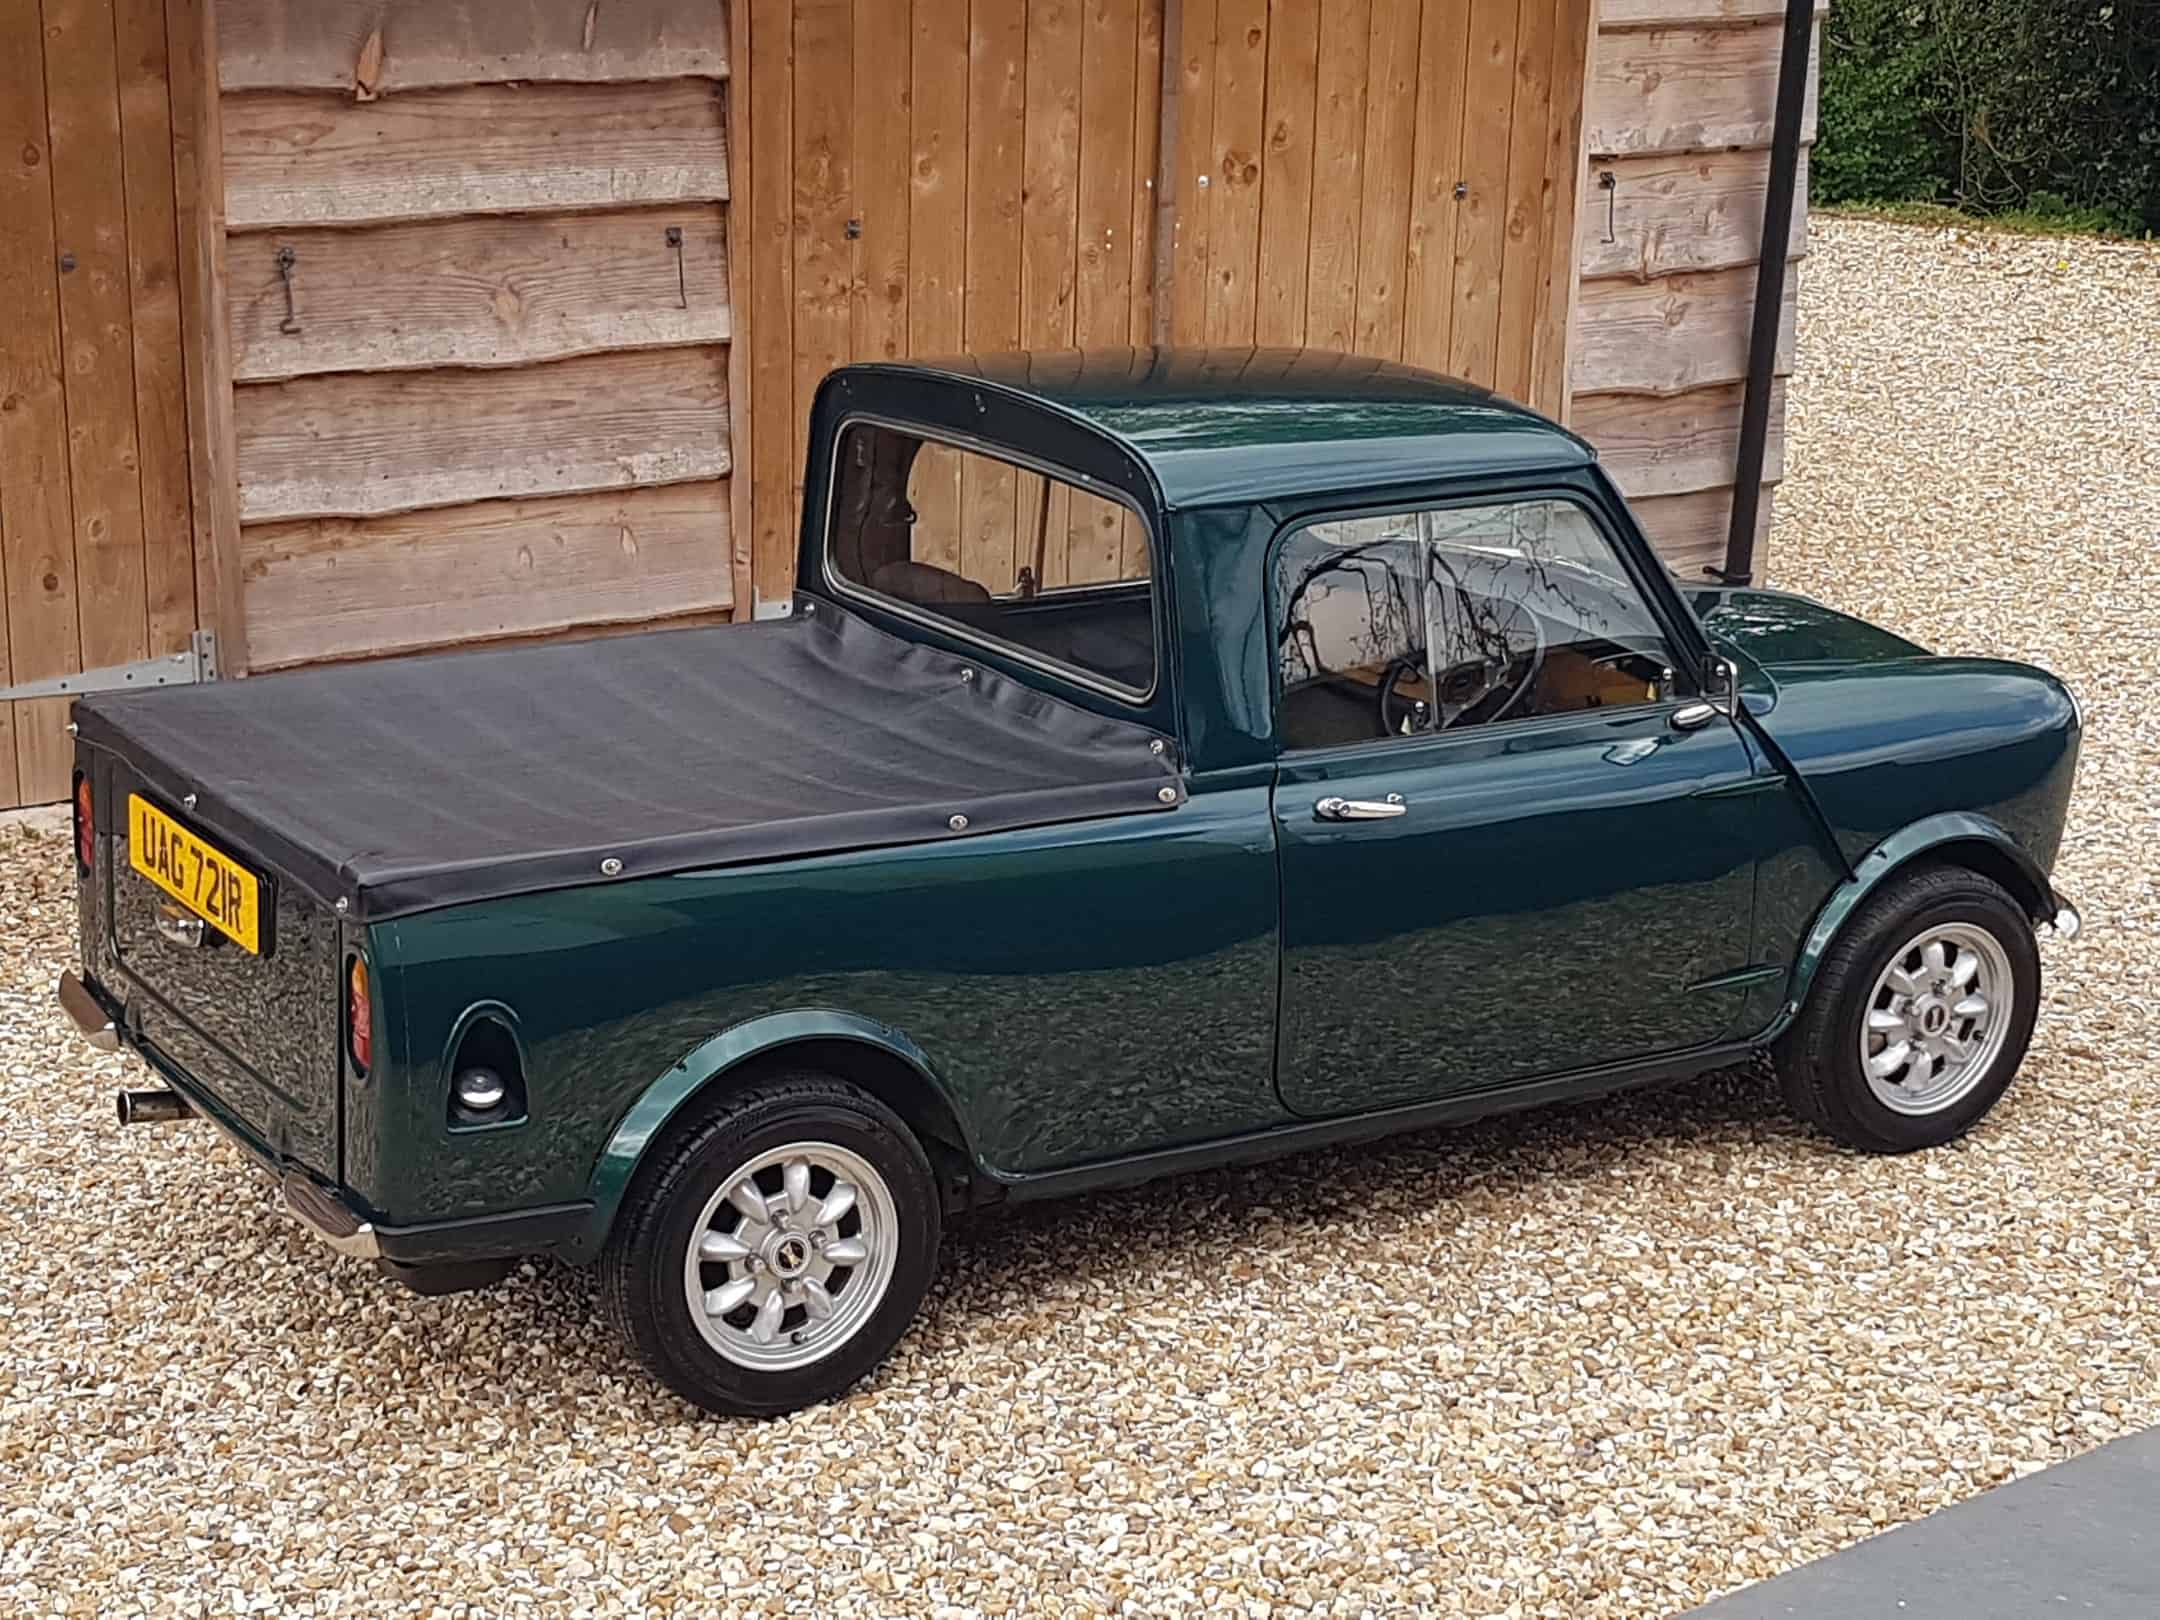 ** NOW SOLD ** 1977 Mini Pick Up In British Racing Green. 1275 cc Engine, So Great Fun!